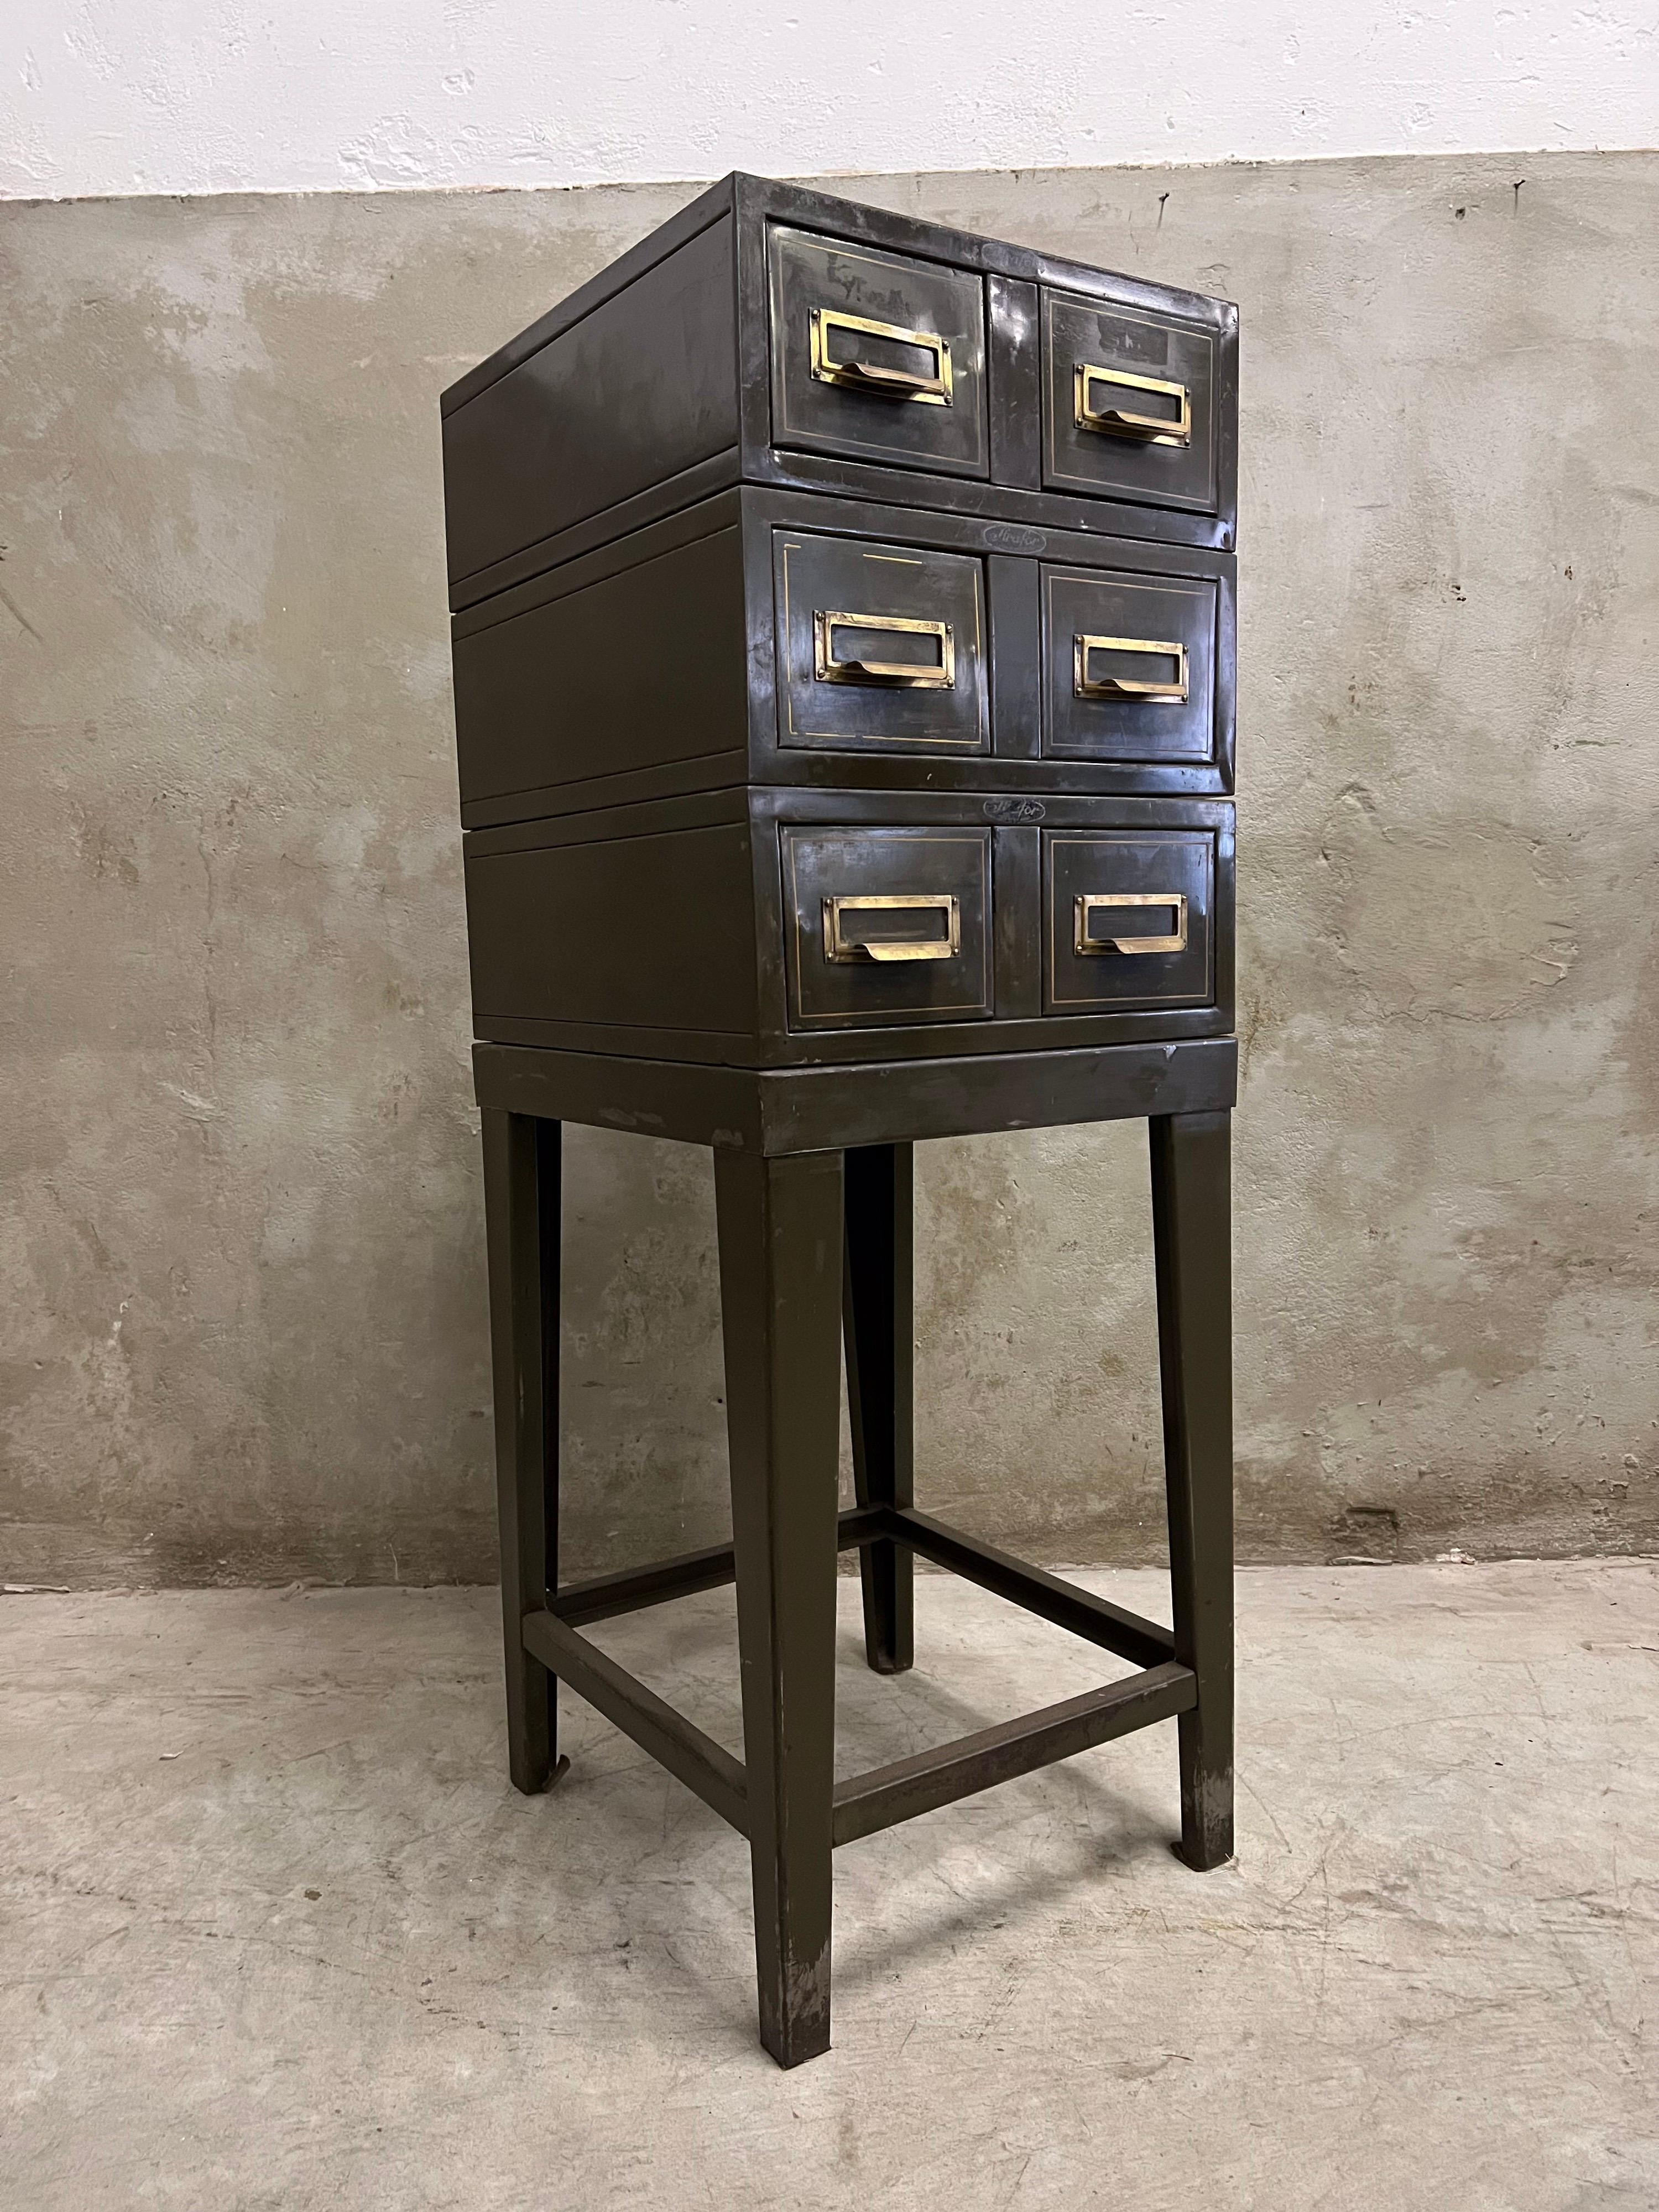 Rare filing cabinet which dates from the 1930s-1940s. All metal with brass fittings. Designed and produced by Strafor Forges Strasbourgh in France. Marks still clearly visible. Consists of 5 parts, 3 parts with 2 drawers and the base. Beautiful